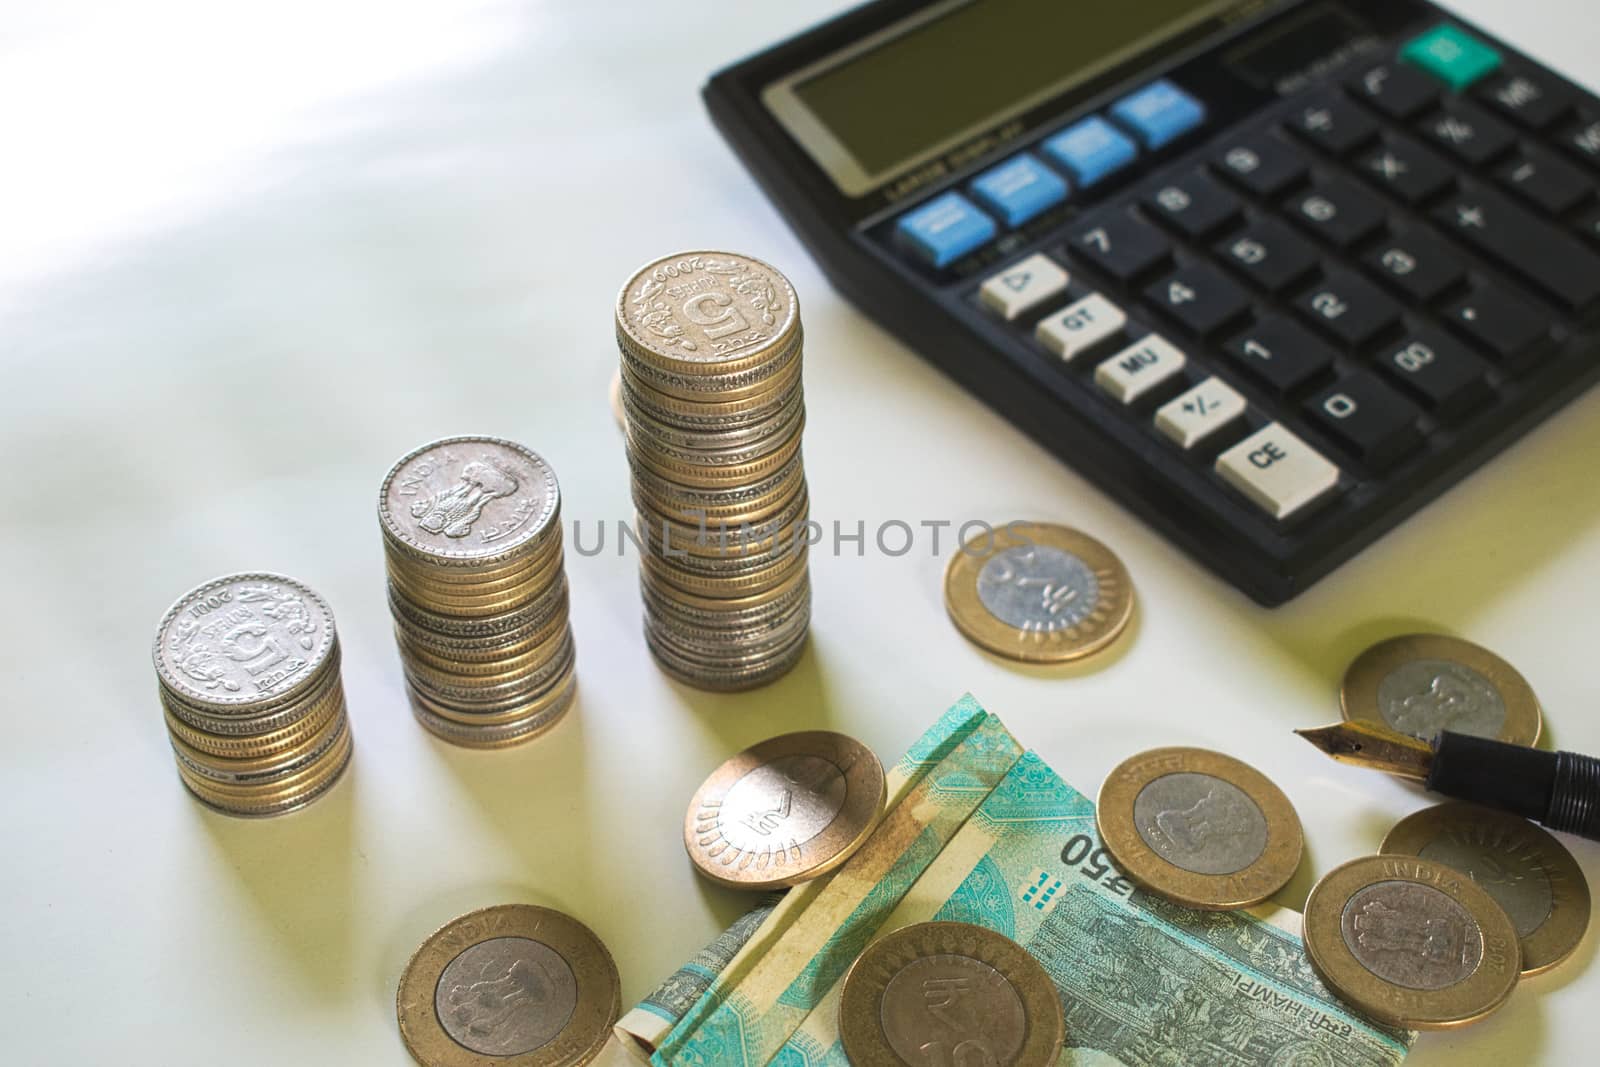 Bunches of five rupee coins are in three different stacks. A calculator and some notes and ten rupee coins are present